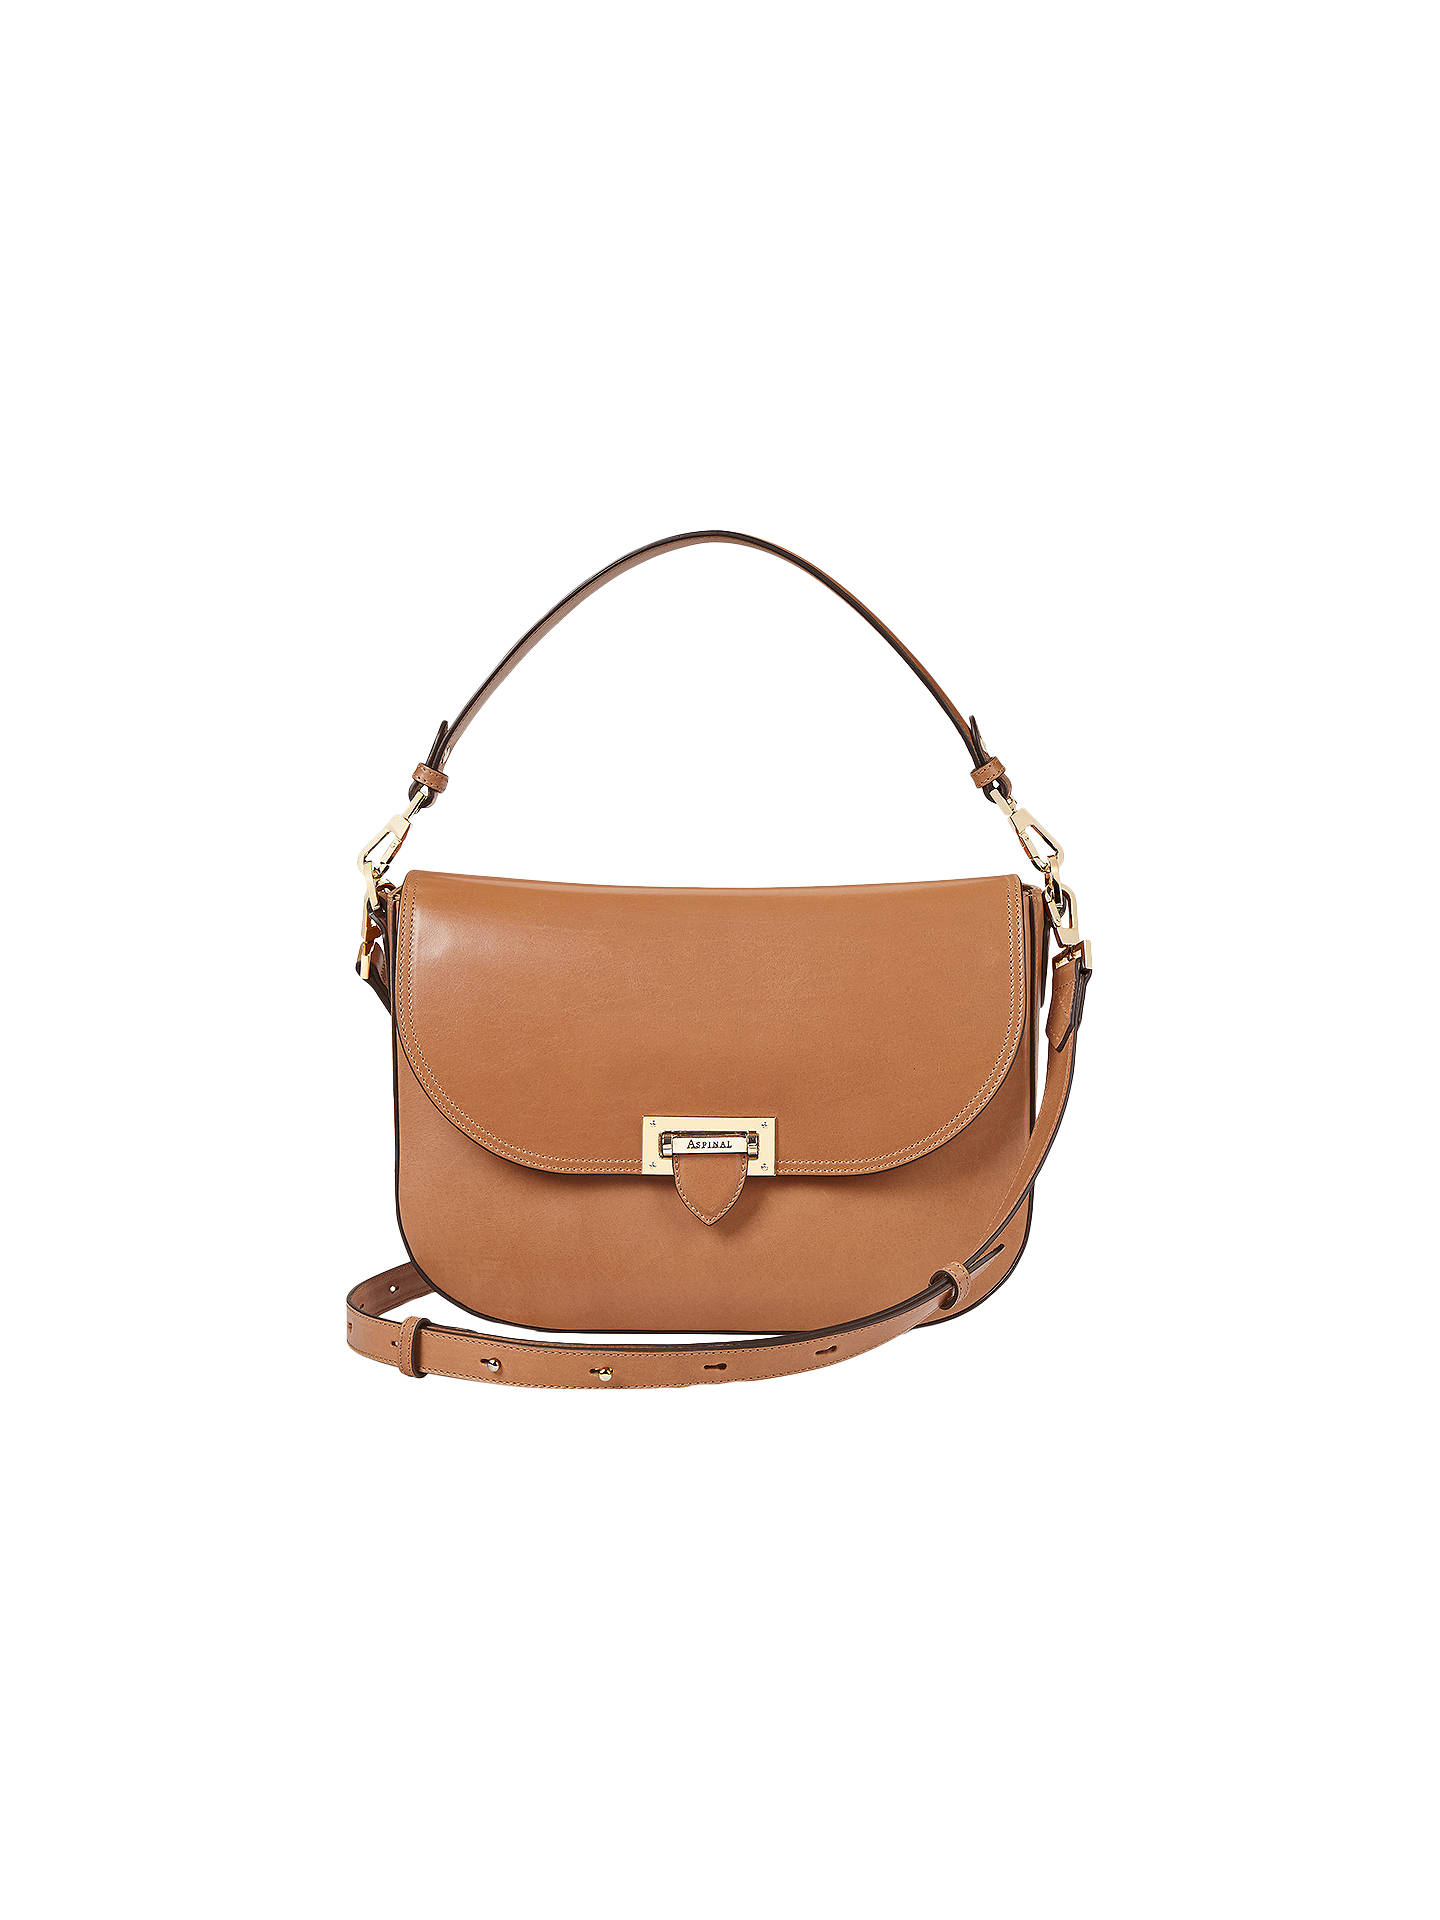 Aspinal of London Letterbox Leather Slouchy Saddle Bag, Tan at John Lewis & Partners